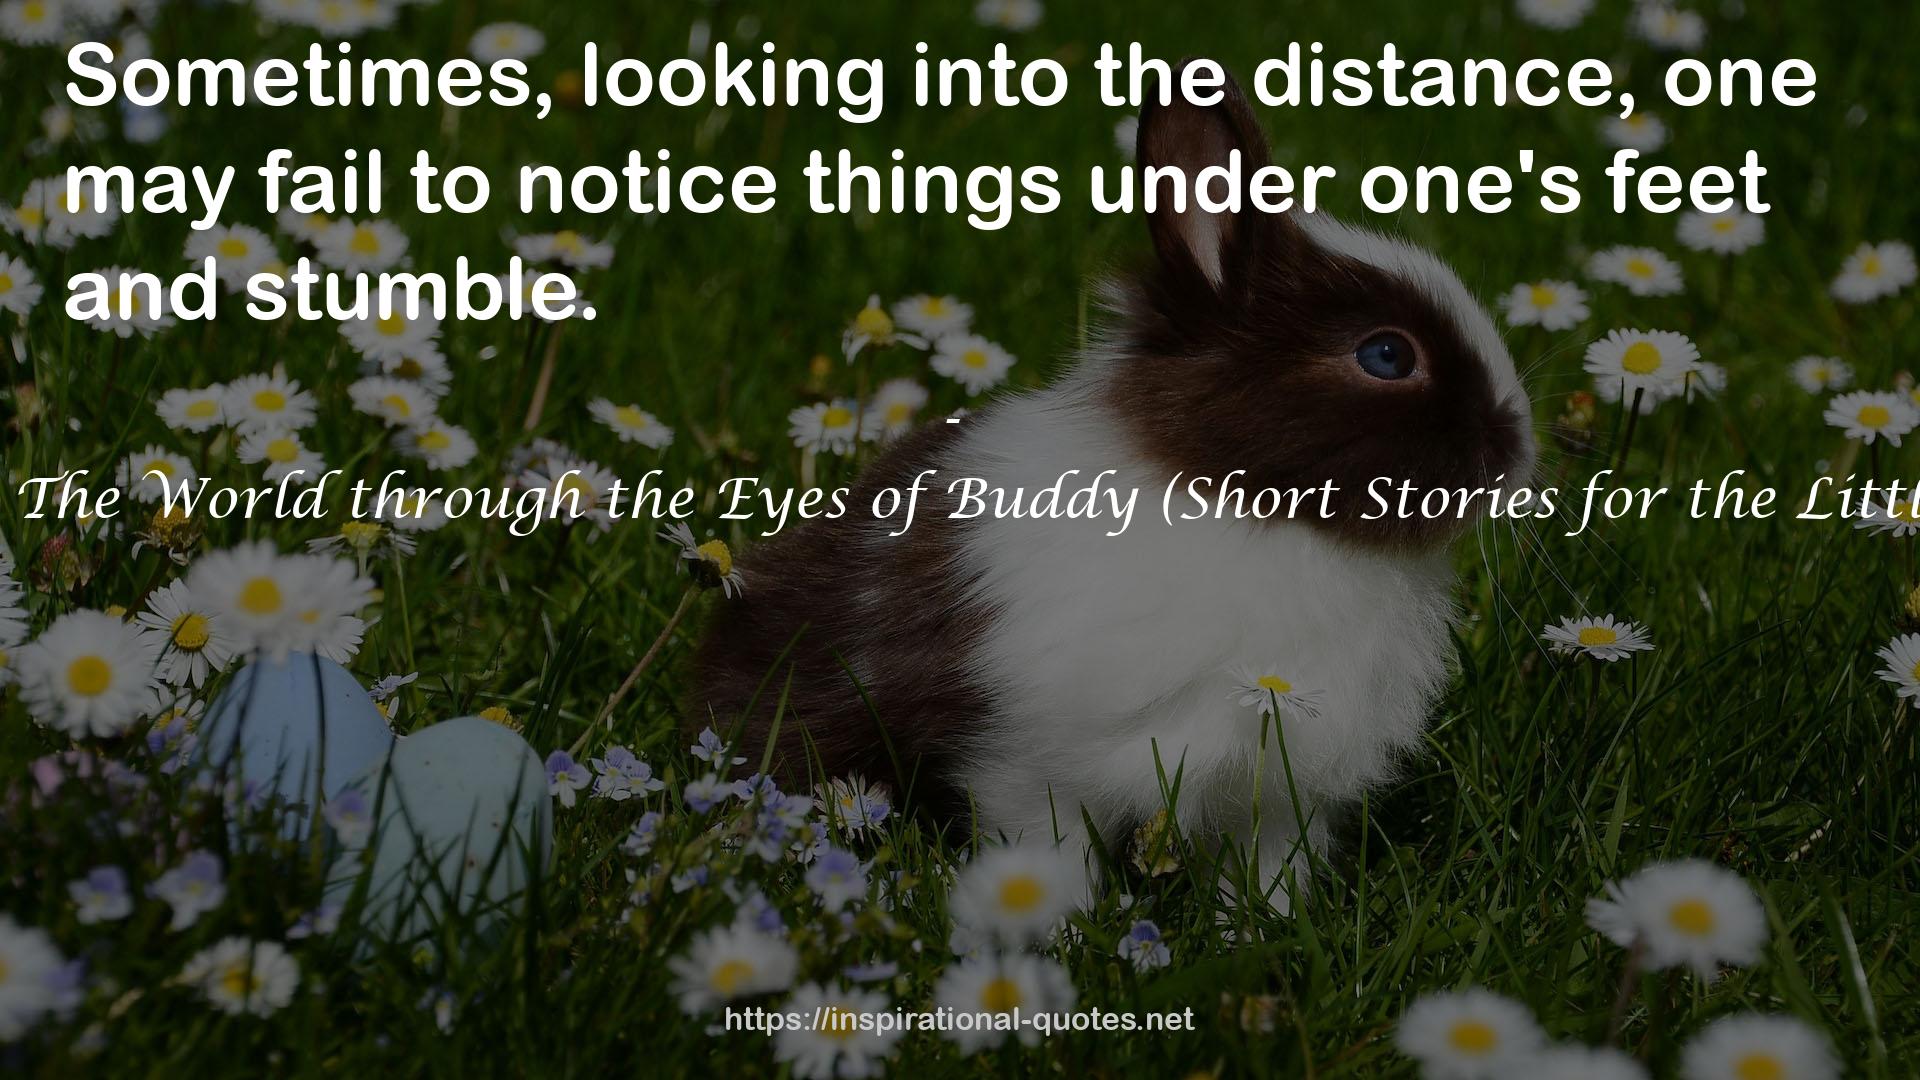 A Dog Called Buddy: The World through the Eyes of Buddy (Short Stories for the Little Ones with a Moral) QUOTES